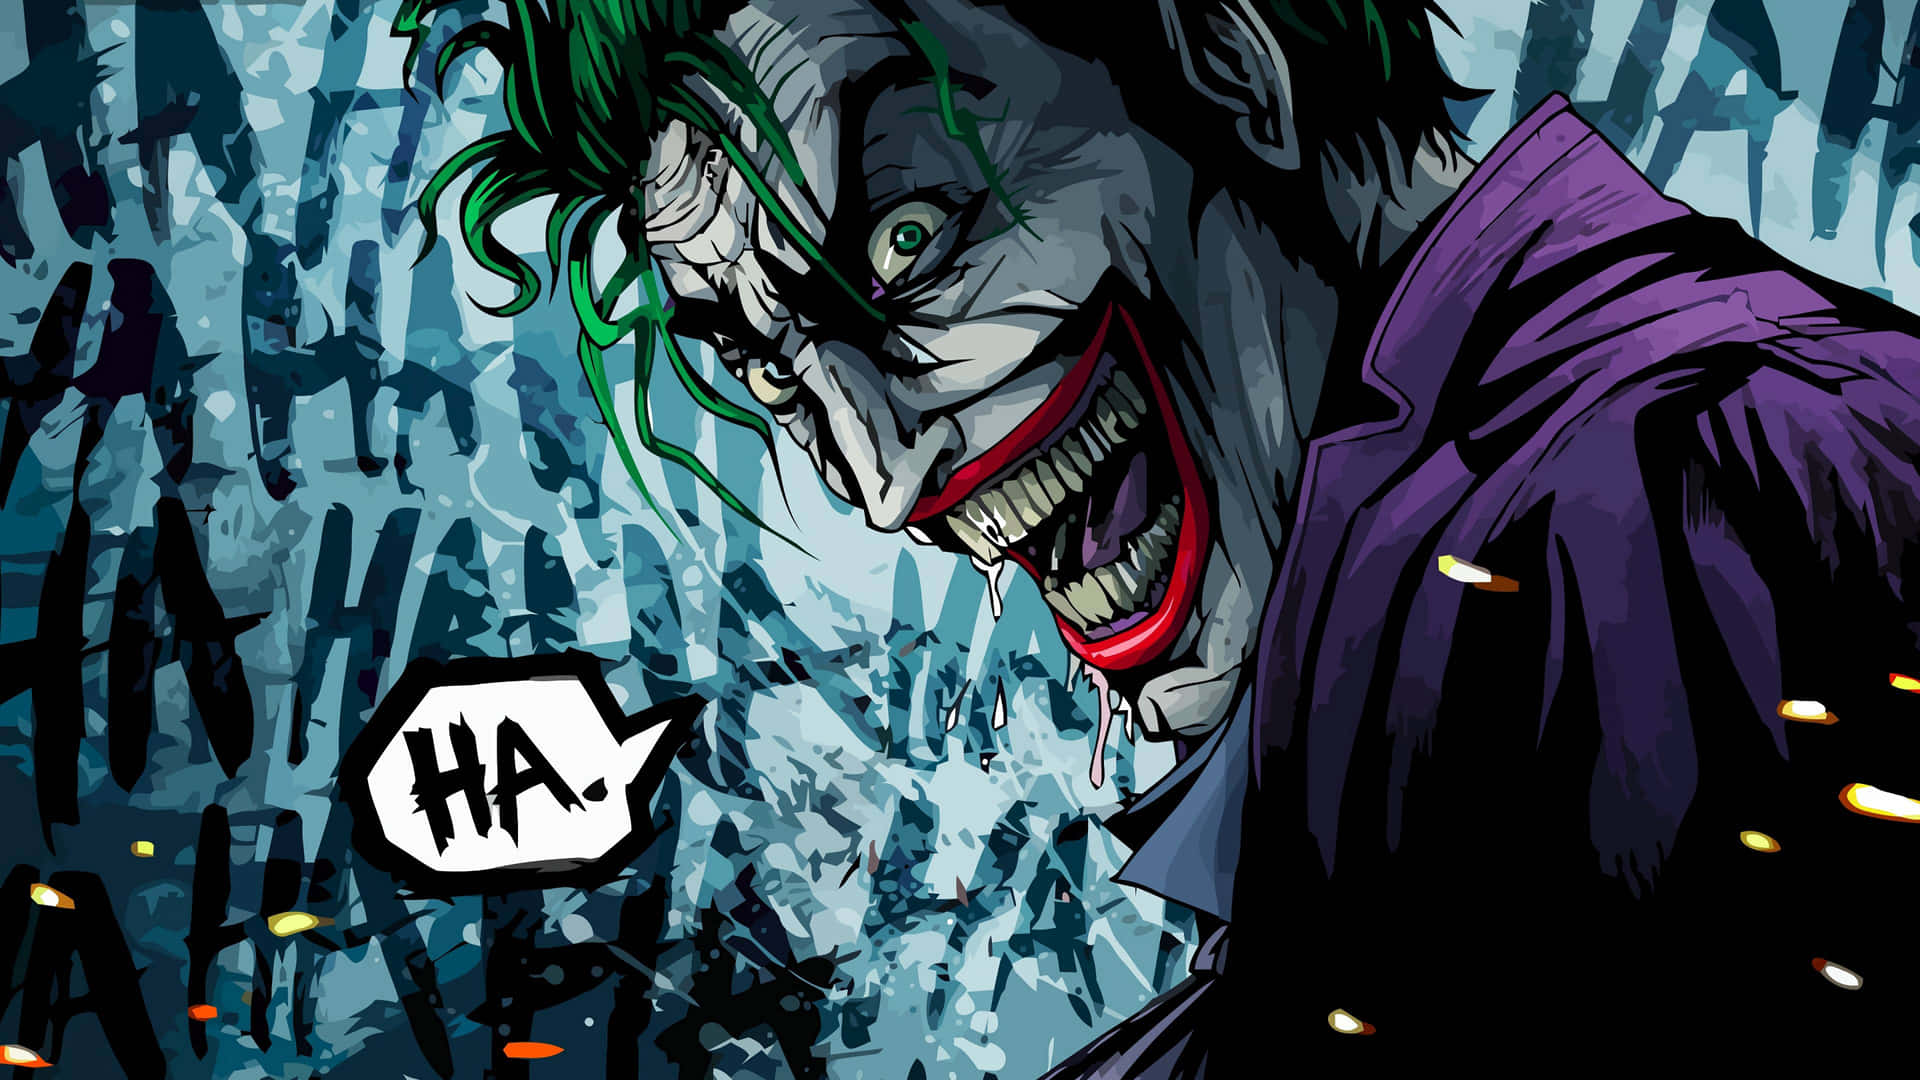 Maniacal Joker Laugh In An Intense Atmosphere Background